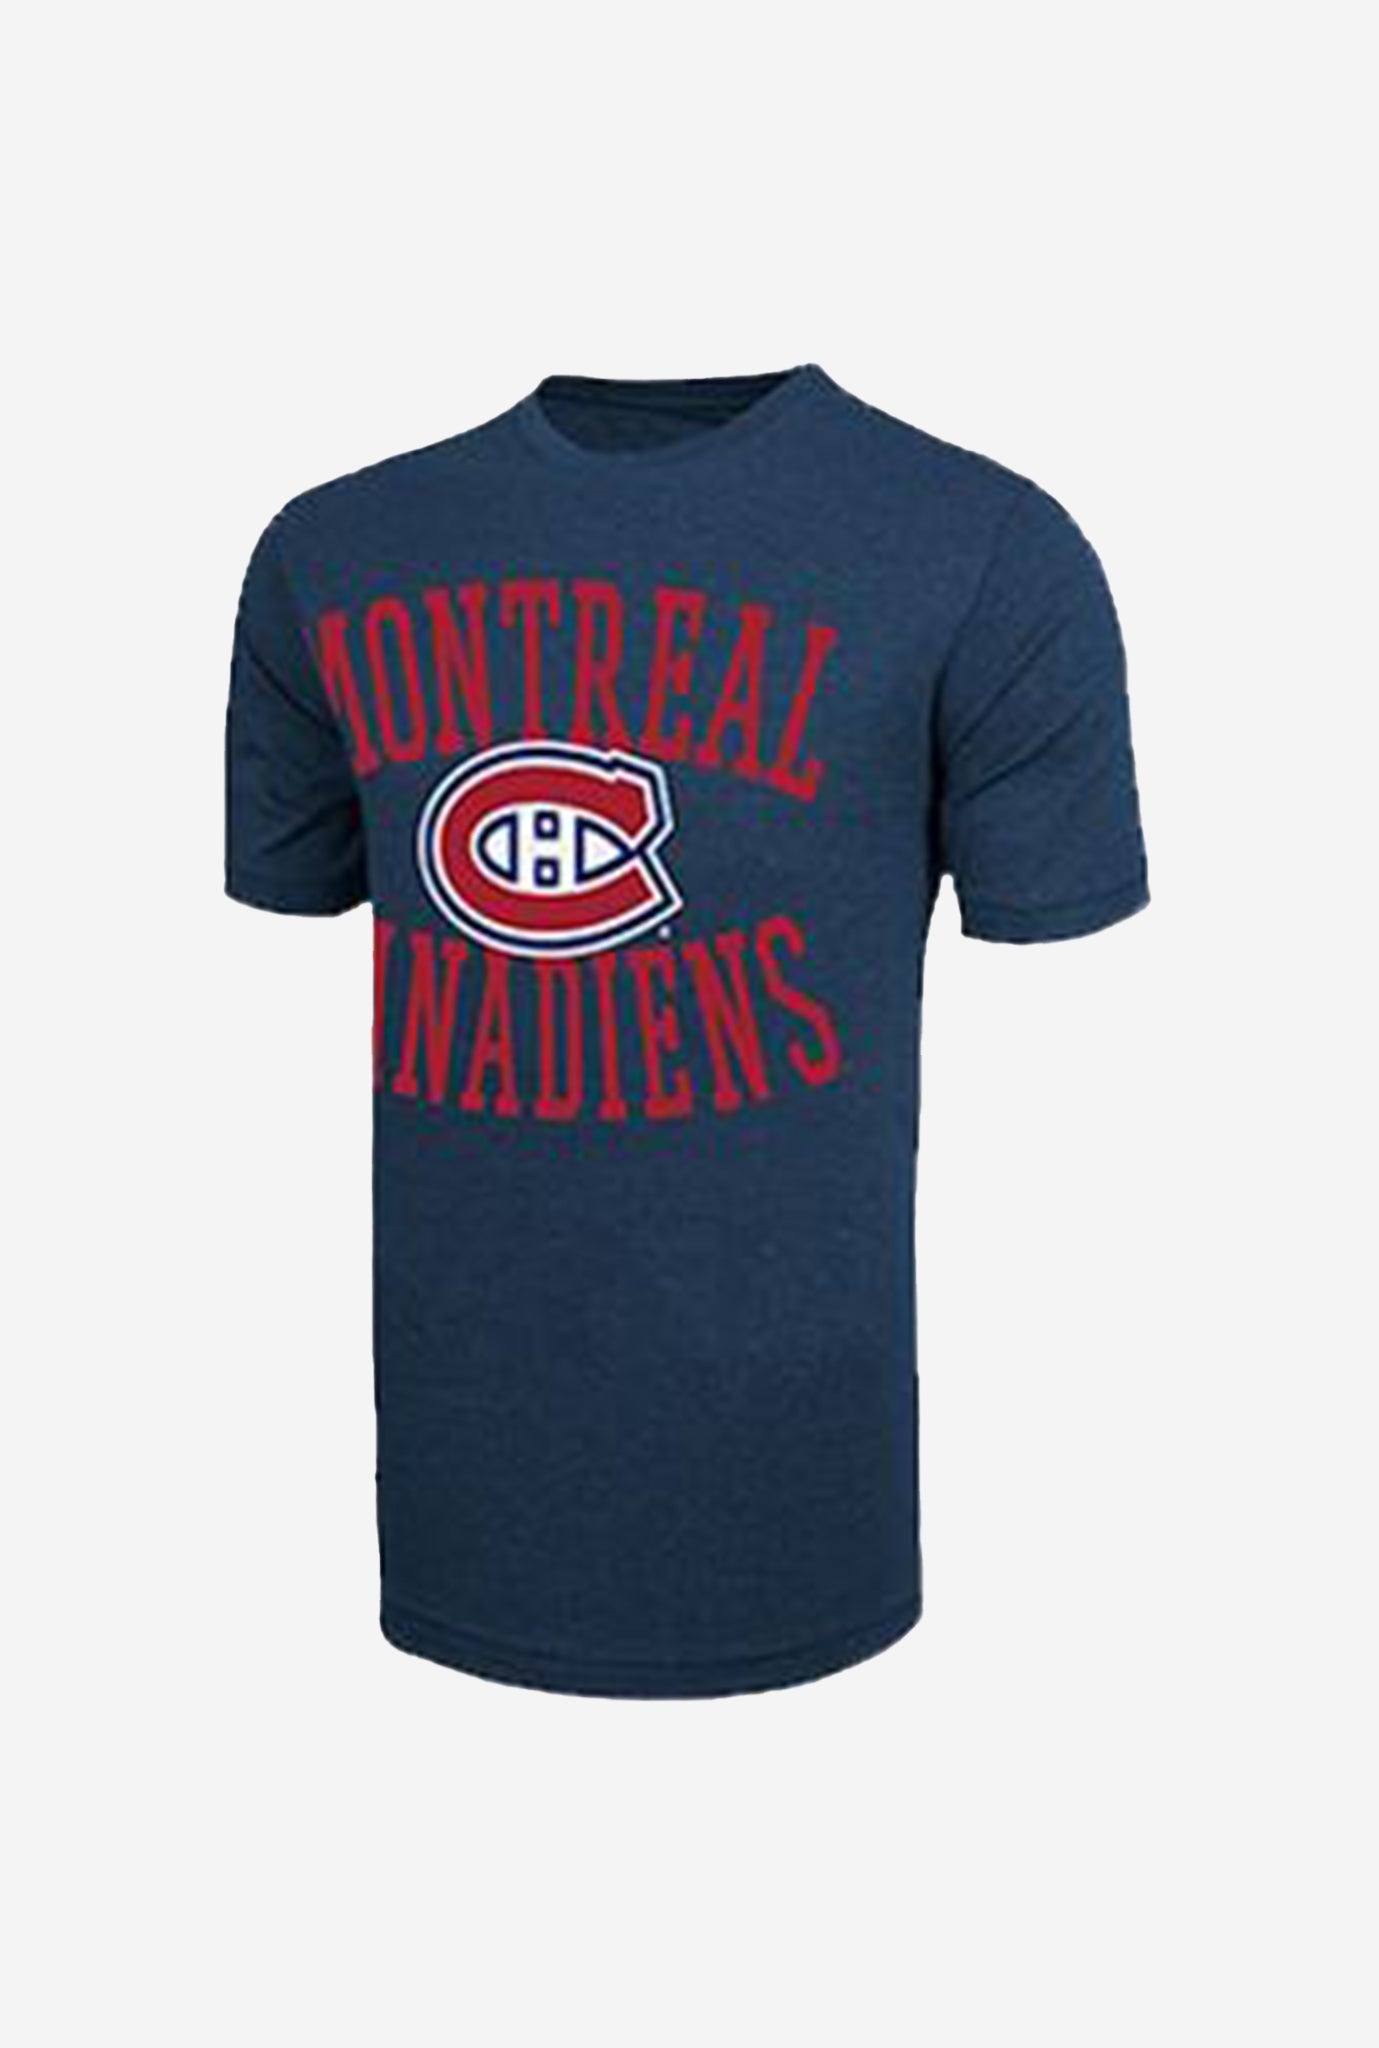 Montreal Canadiens Archie T-Shirt - Navy